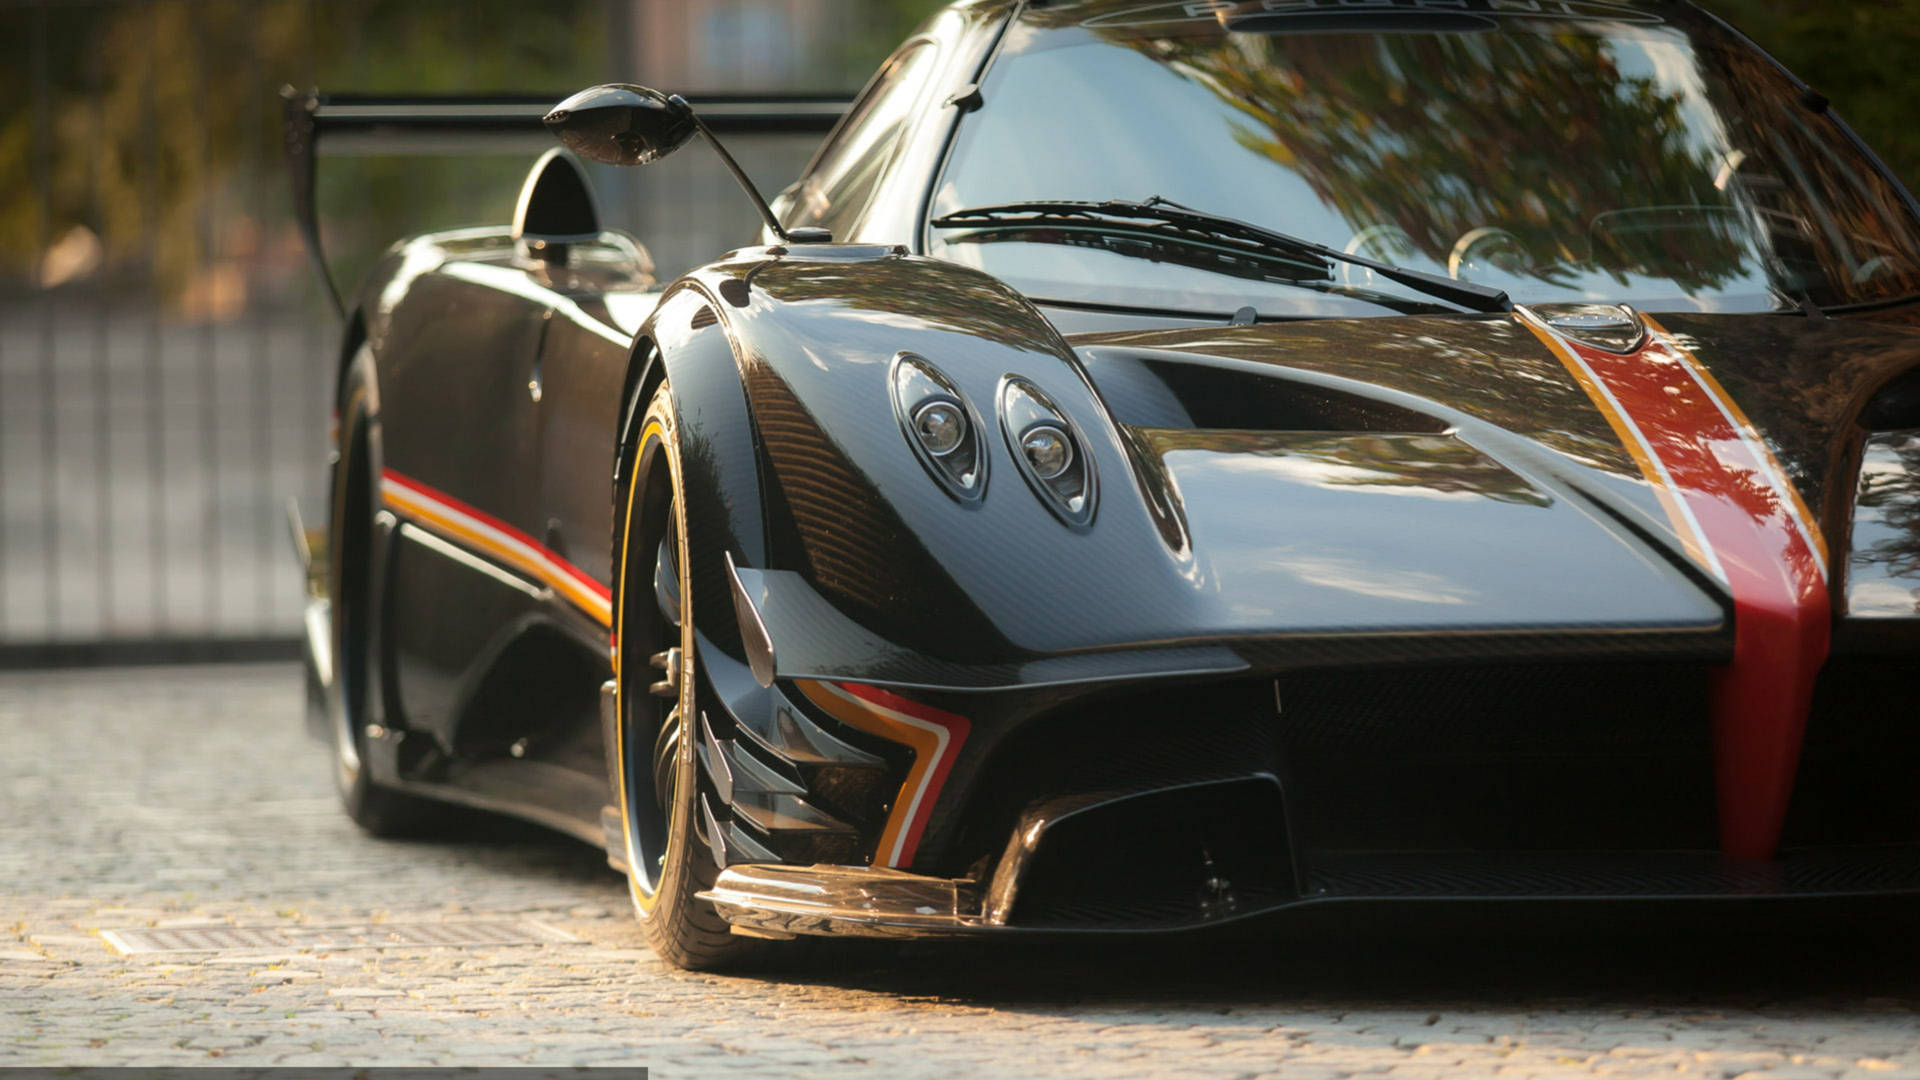 An Exhilarating Ride In The Luxurious Angle Of The Pagani Huayra. Wallpaper